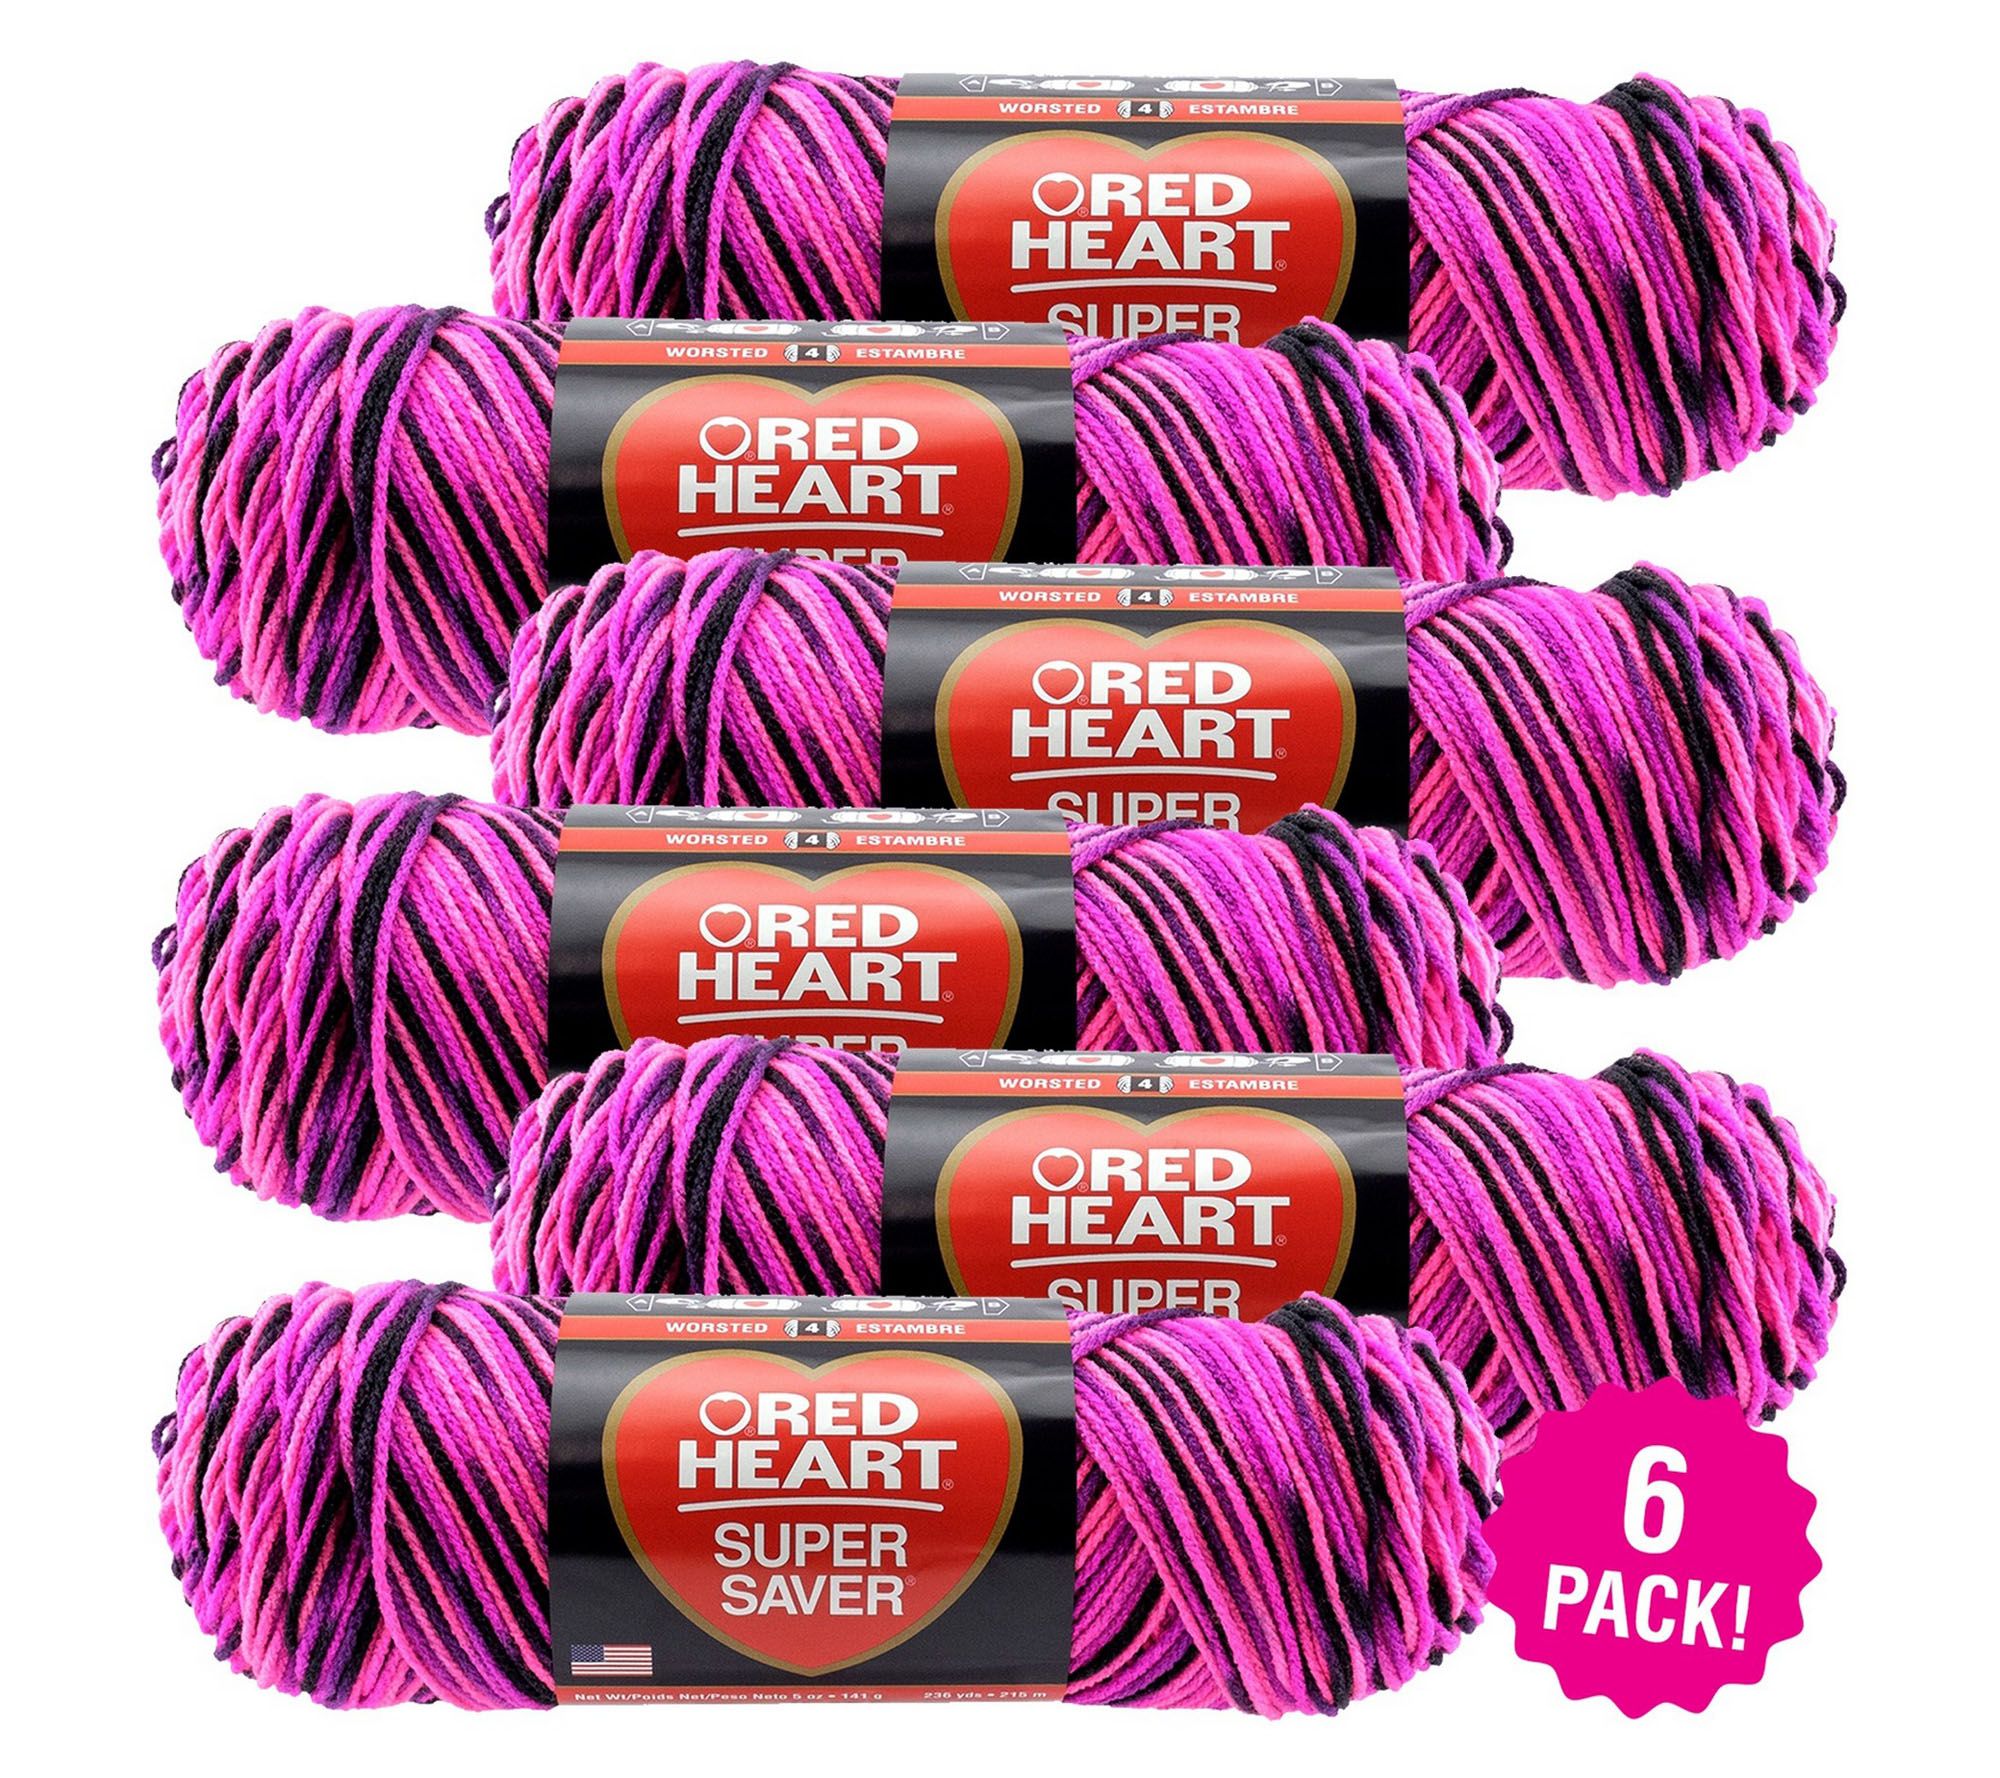 Red Heart Multipack of 6 Lettuce with Love Yarn